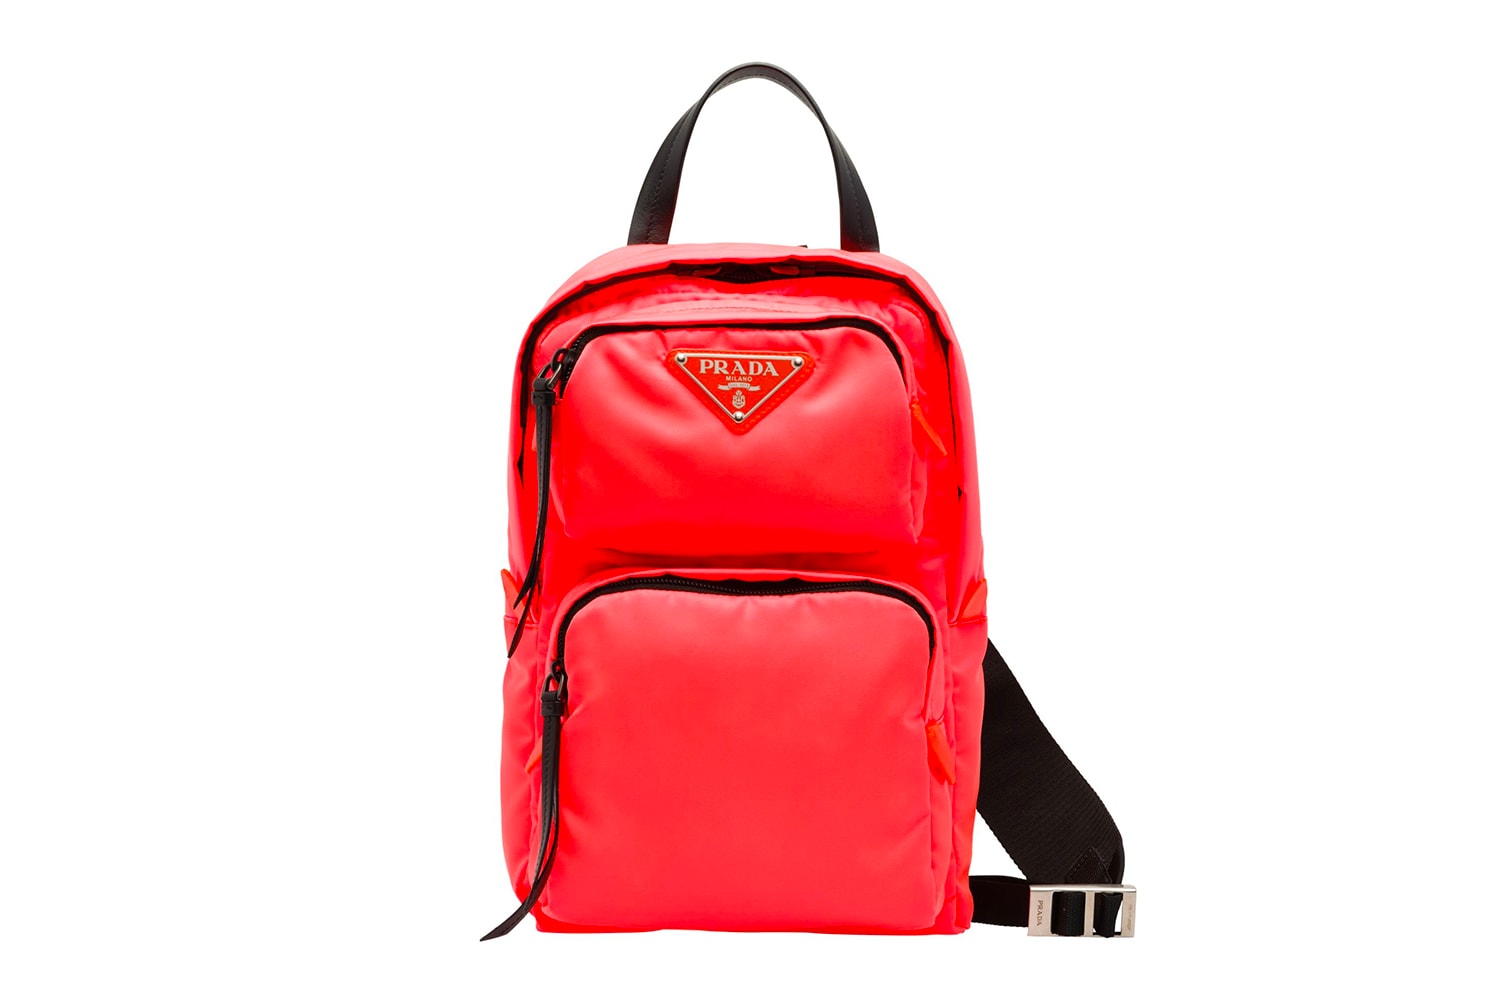 Prada Fluo Fluorescent Fall Winter 2018 One Shoulder Backpack Red